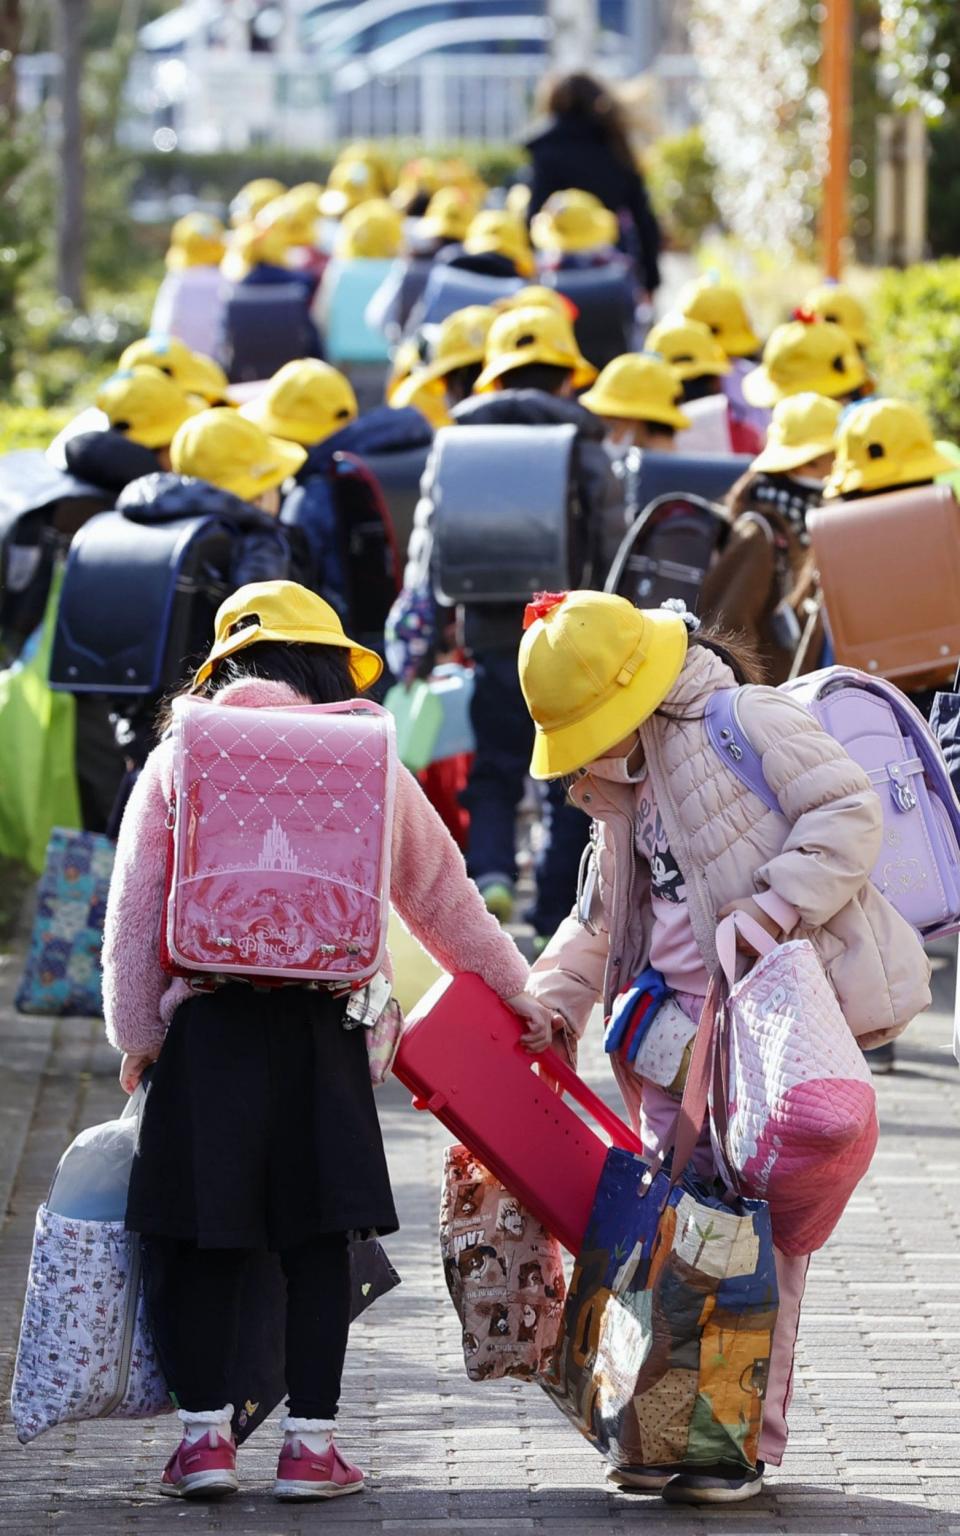 Pupils leave an elementary school in Tokyo, which was abruptly declared the last day of the school year after Prime Minister Shinzo Abe announced the government would request all schools in Japan to close - B434